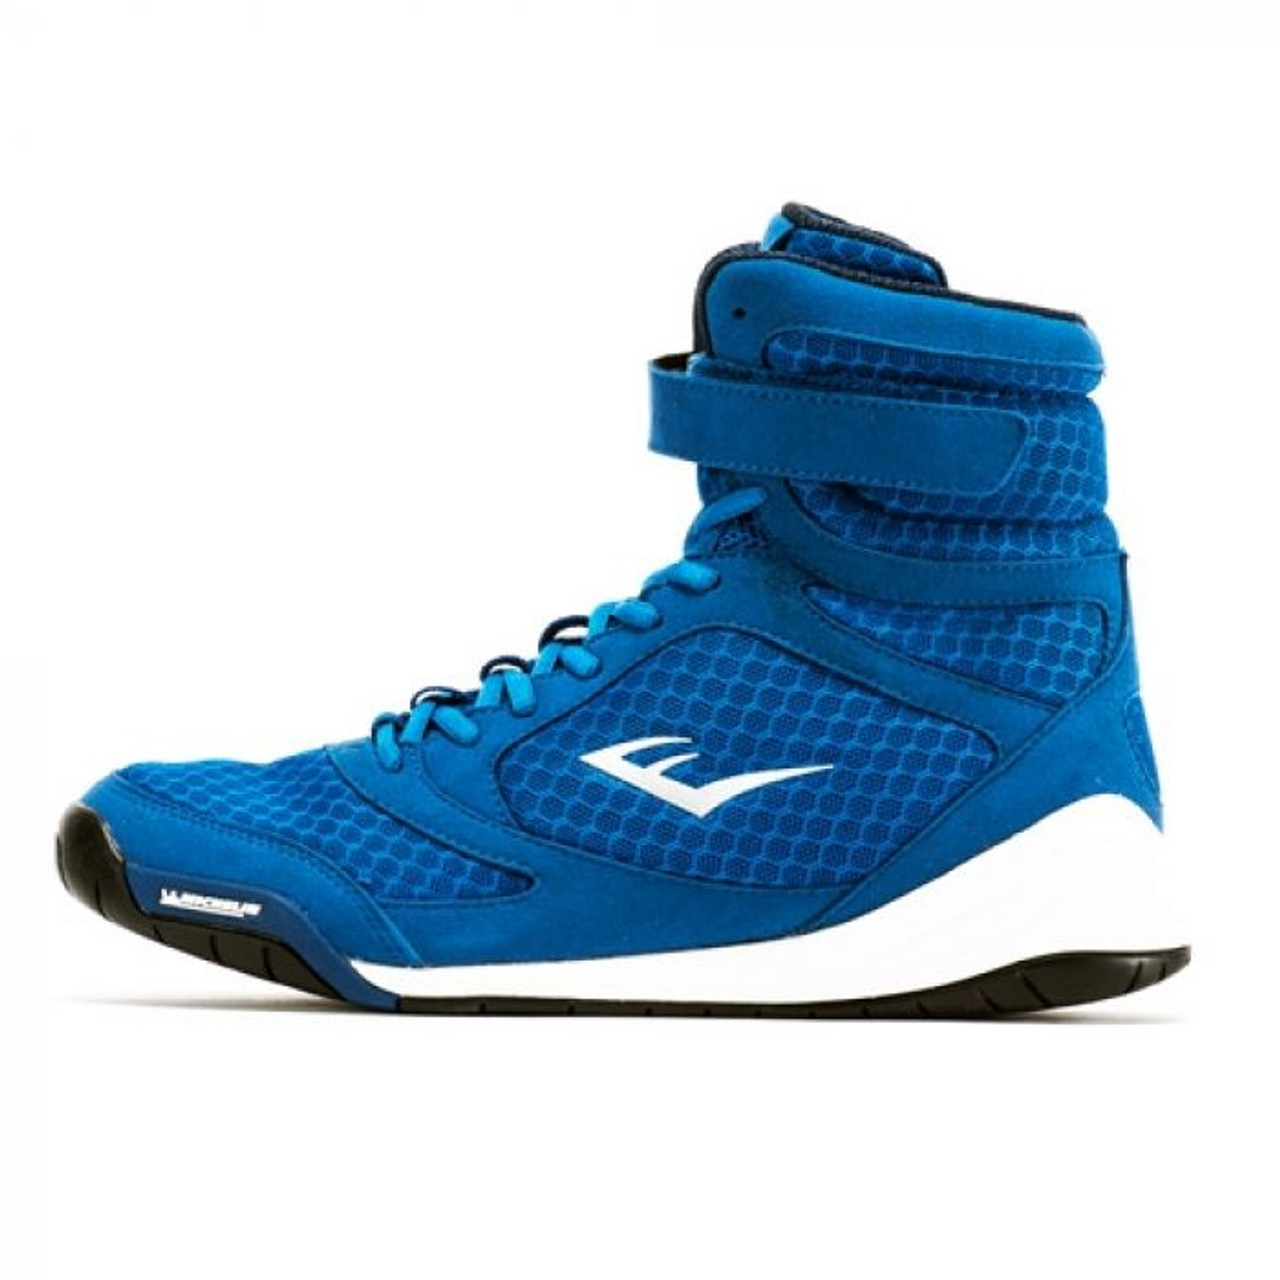 Everlast Elite High Top Boxing Shoes 